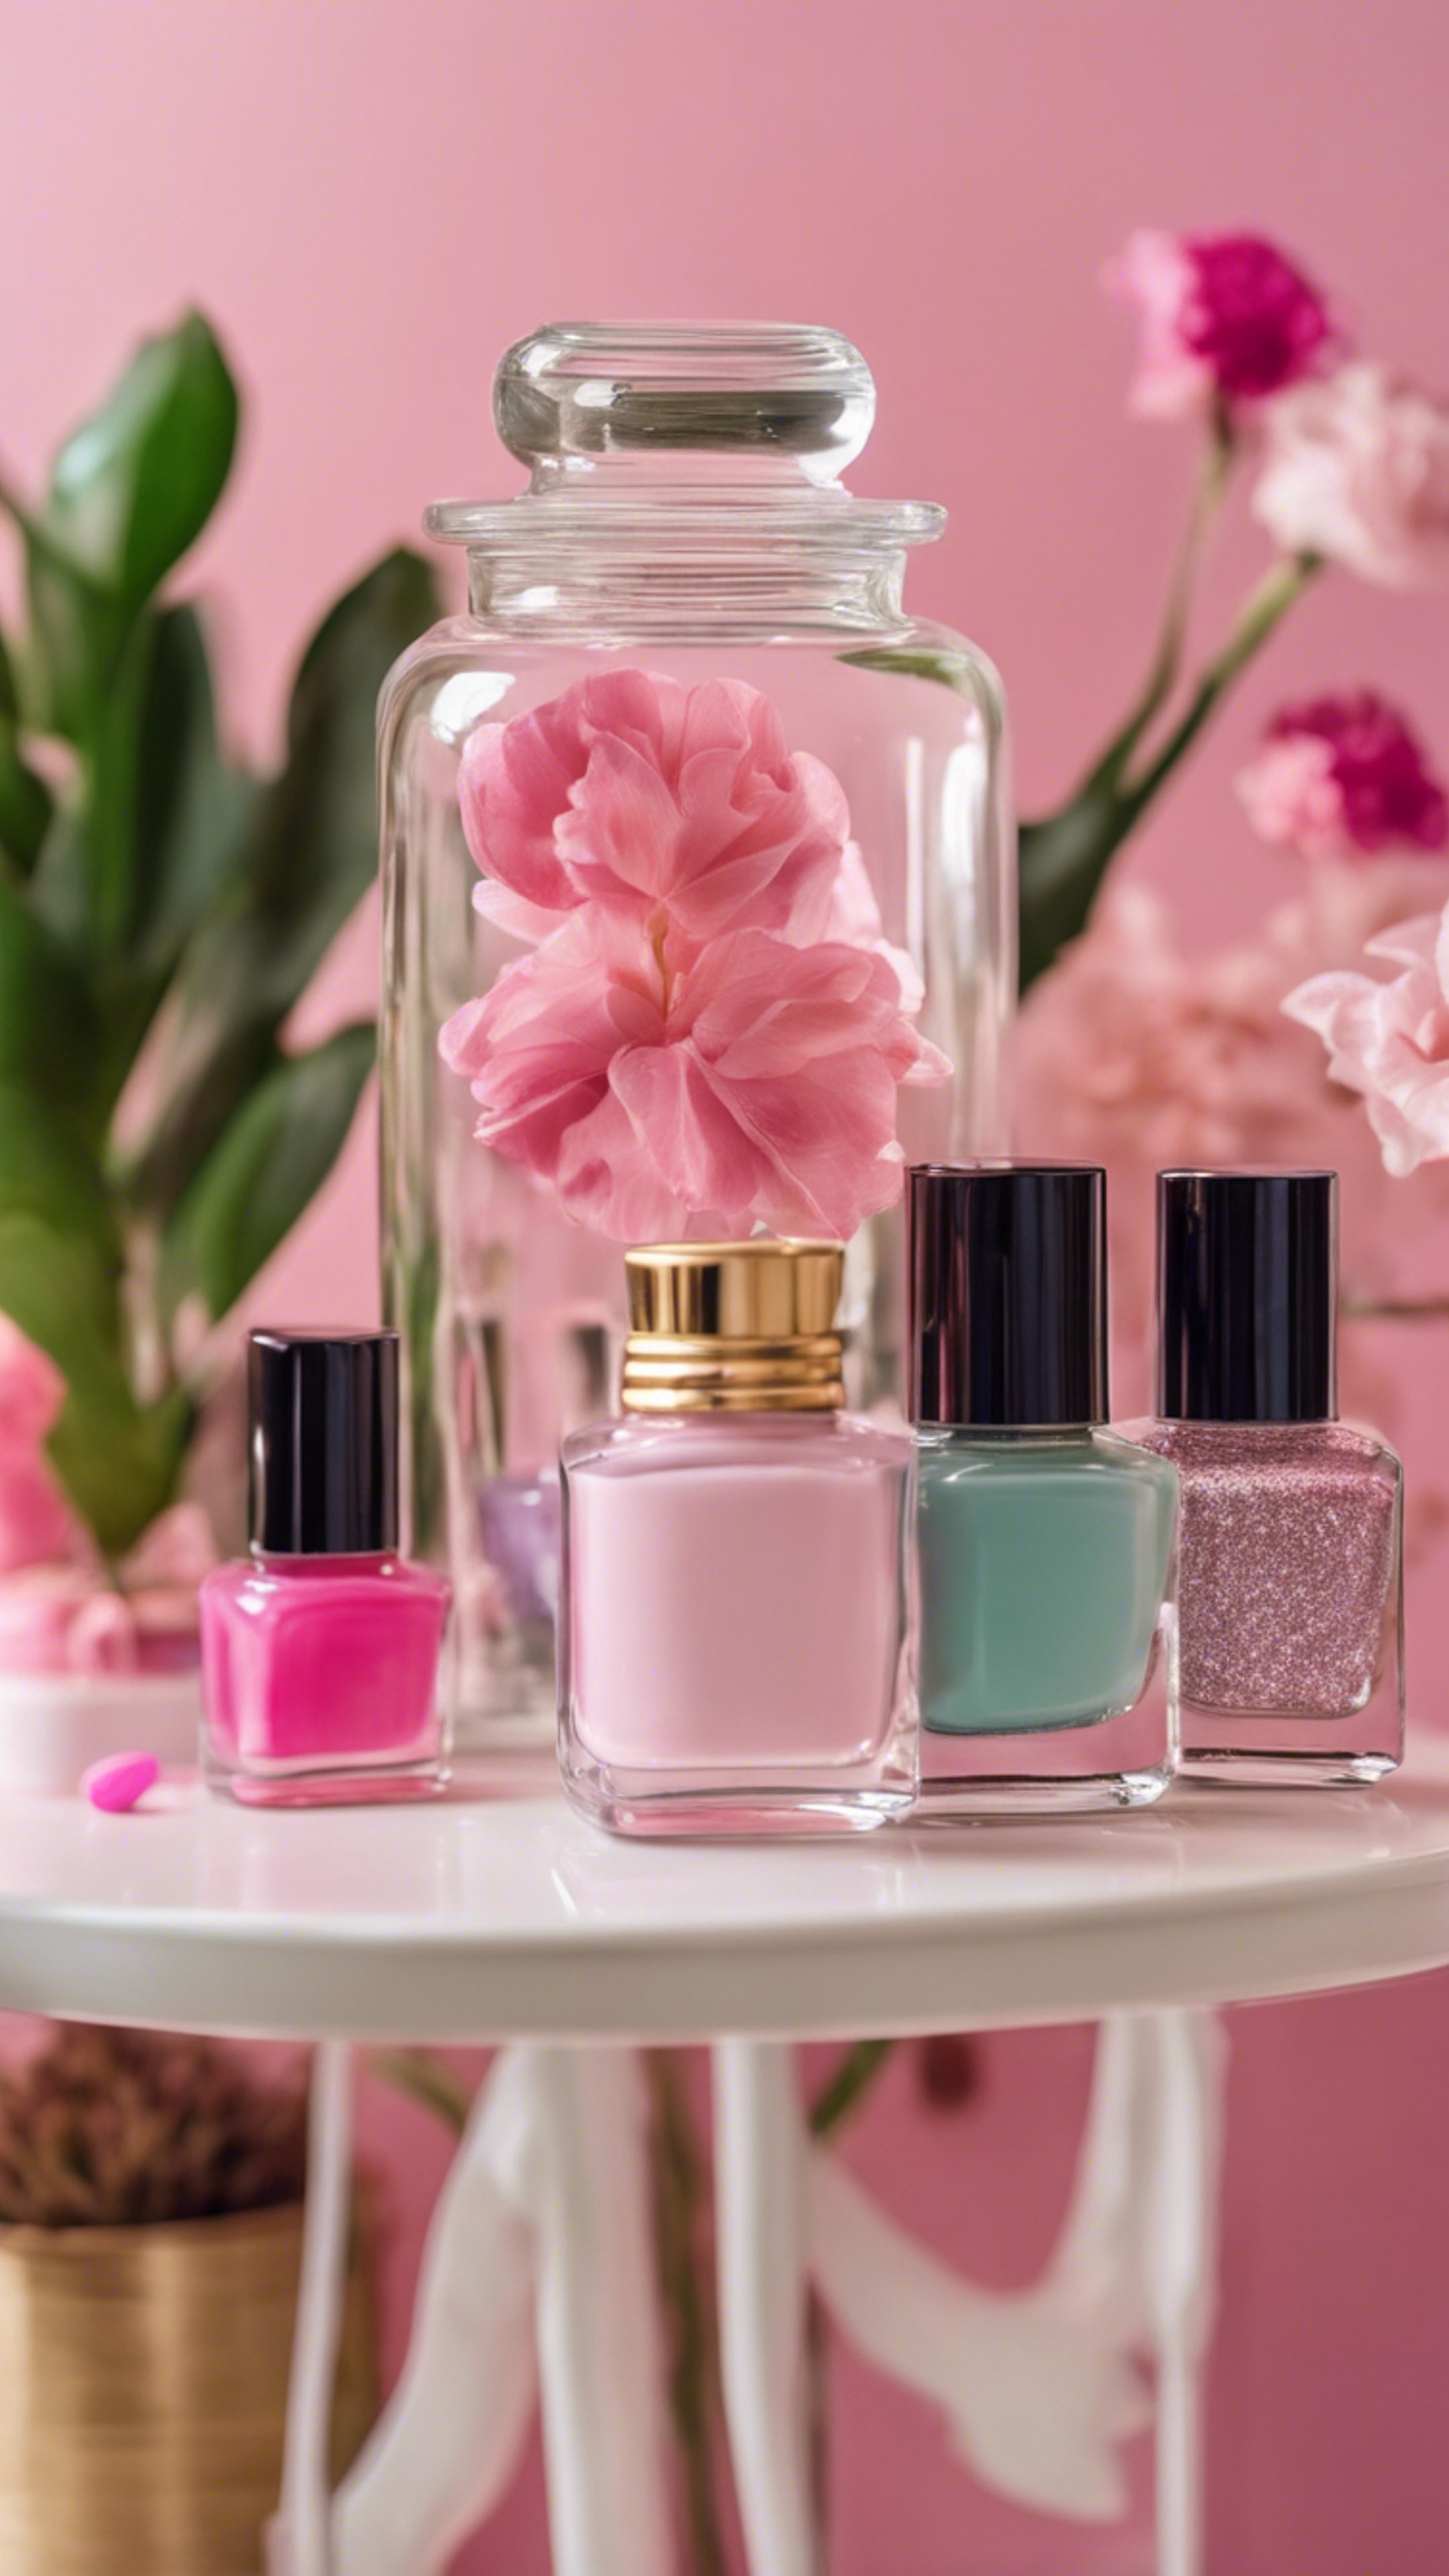 A glass jar full of colorful girly nail polishes on a pink dressing table with a chic plant in the background. Tapeta[6e6d72fe0d8e4450902a]